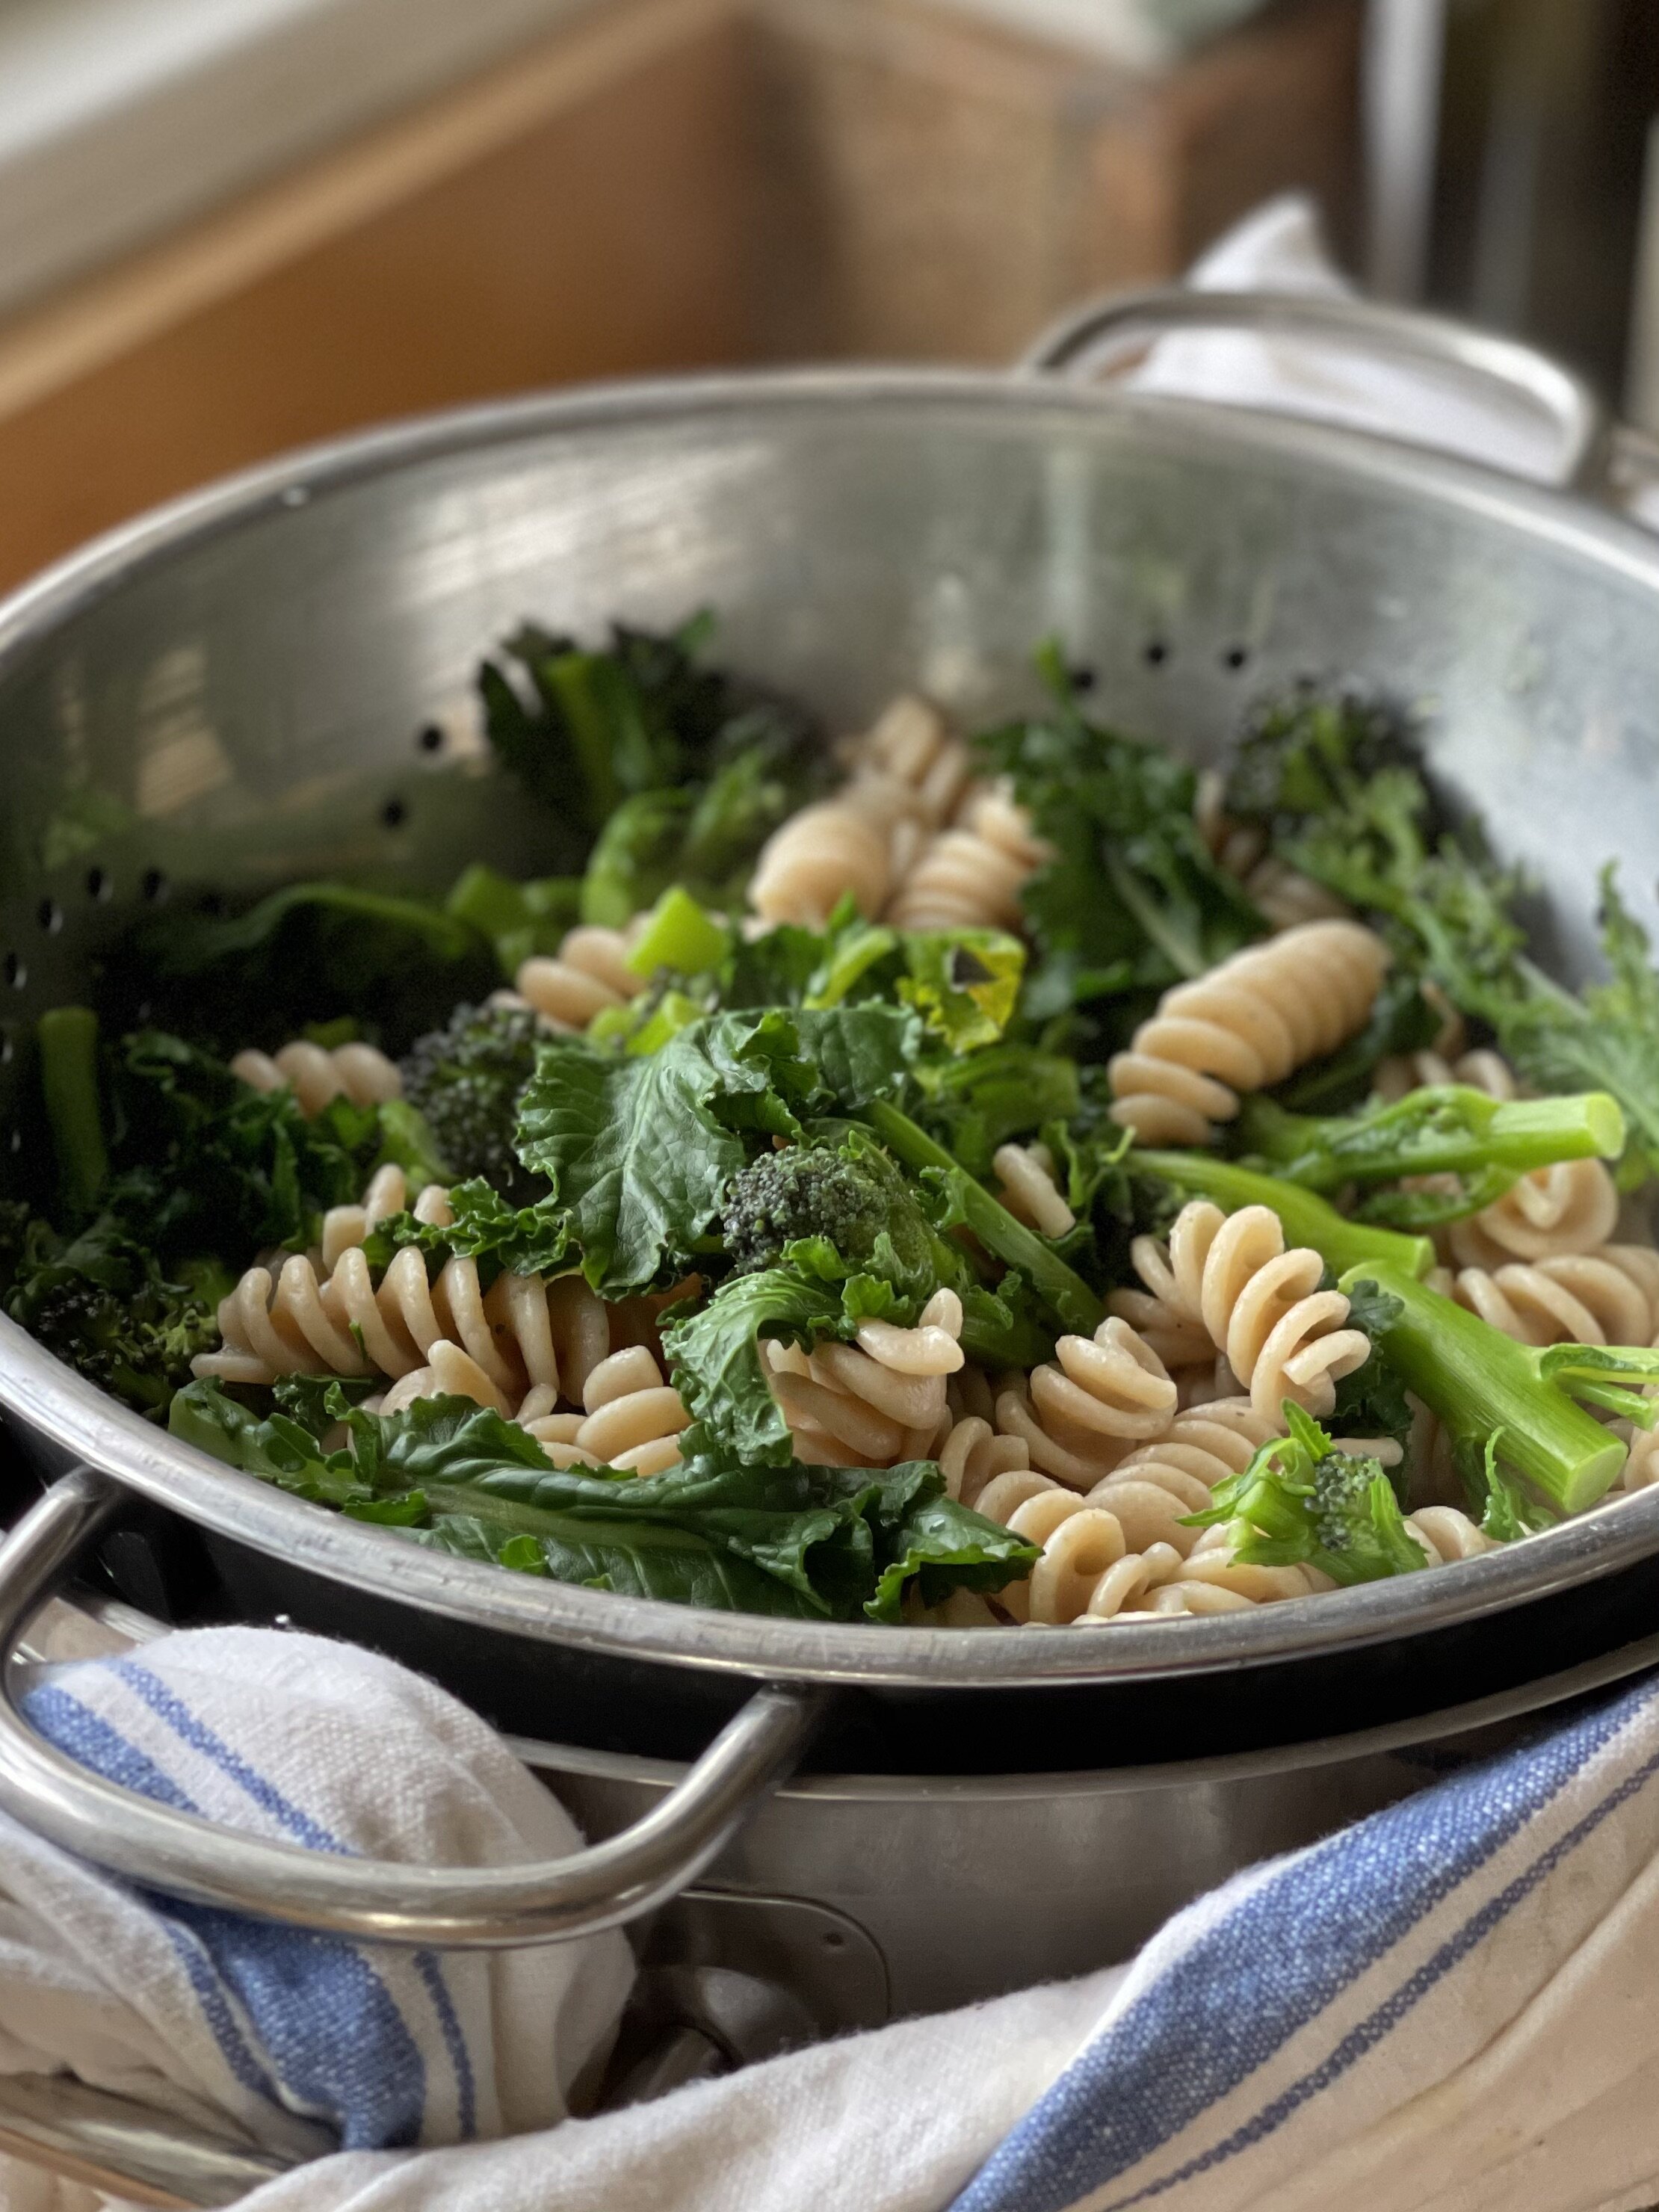 A colander of pasta and purple sprouting broccoli